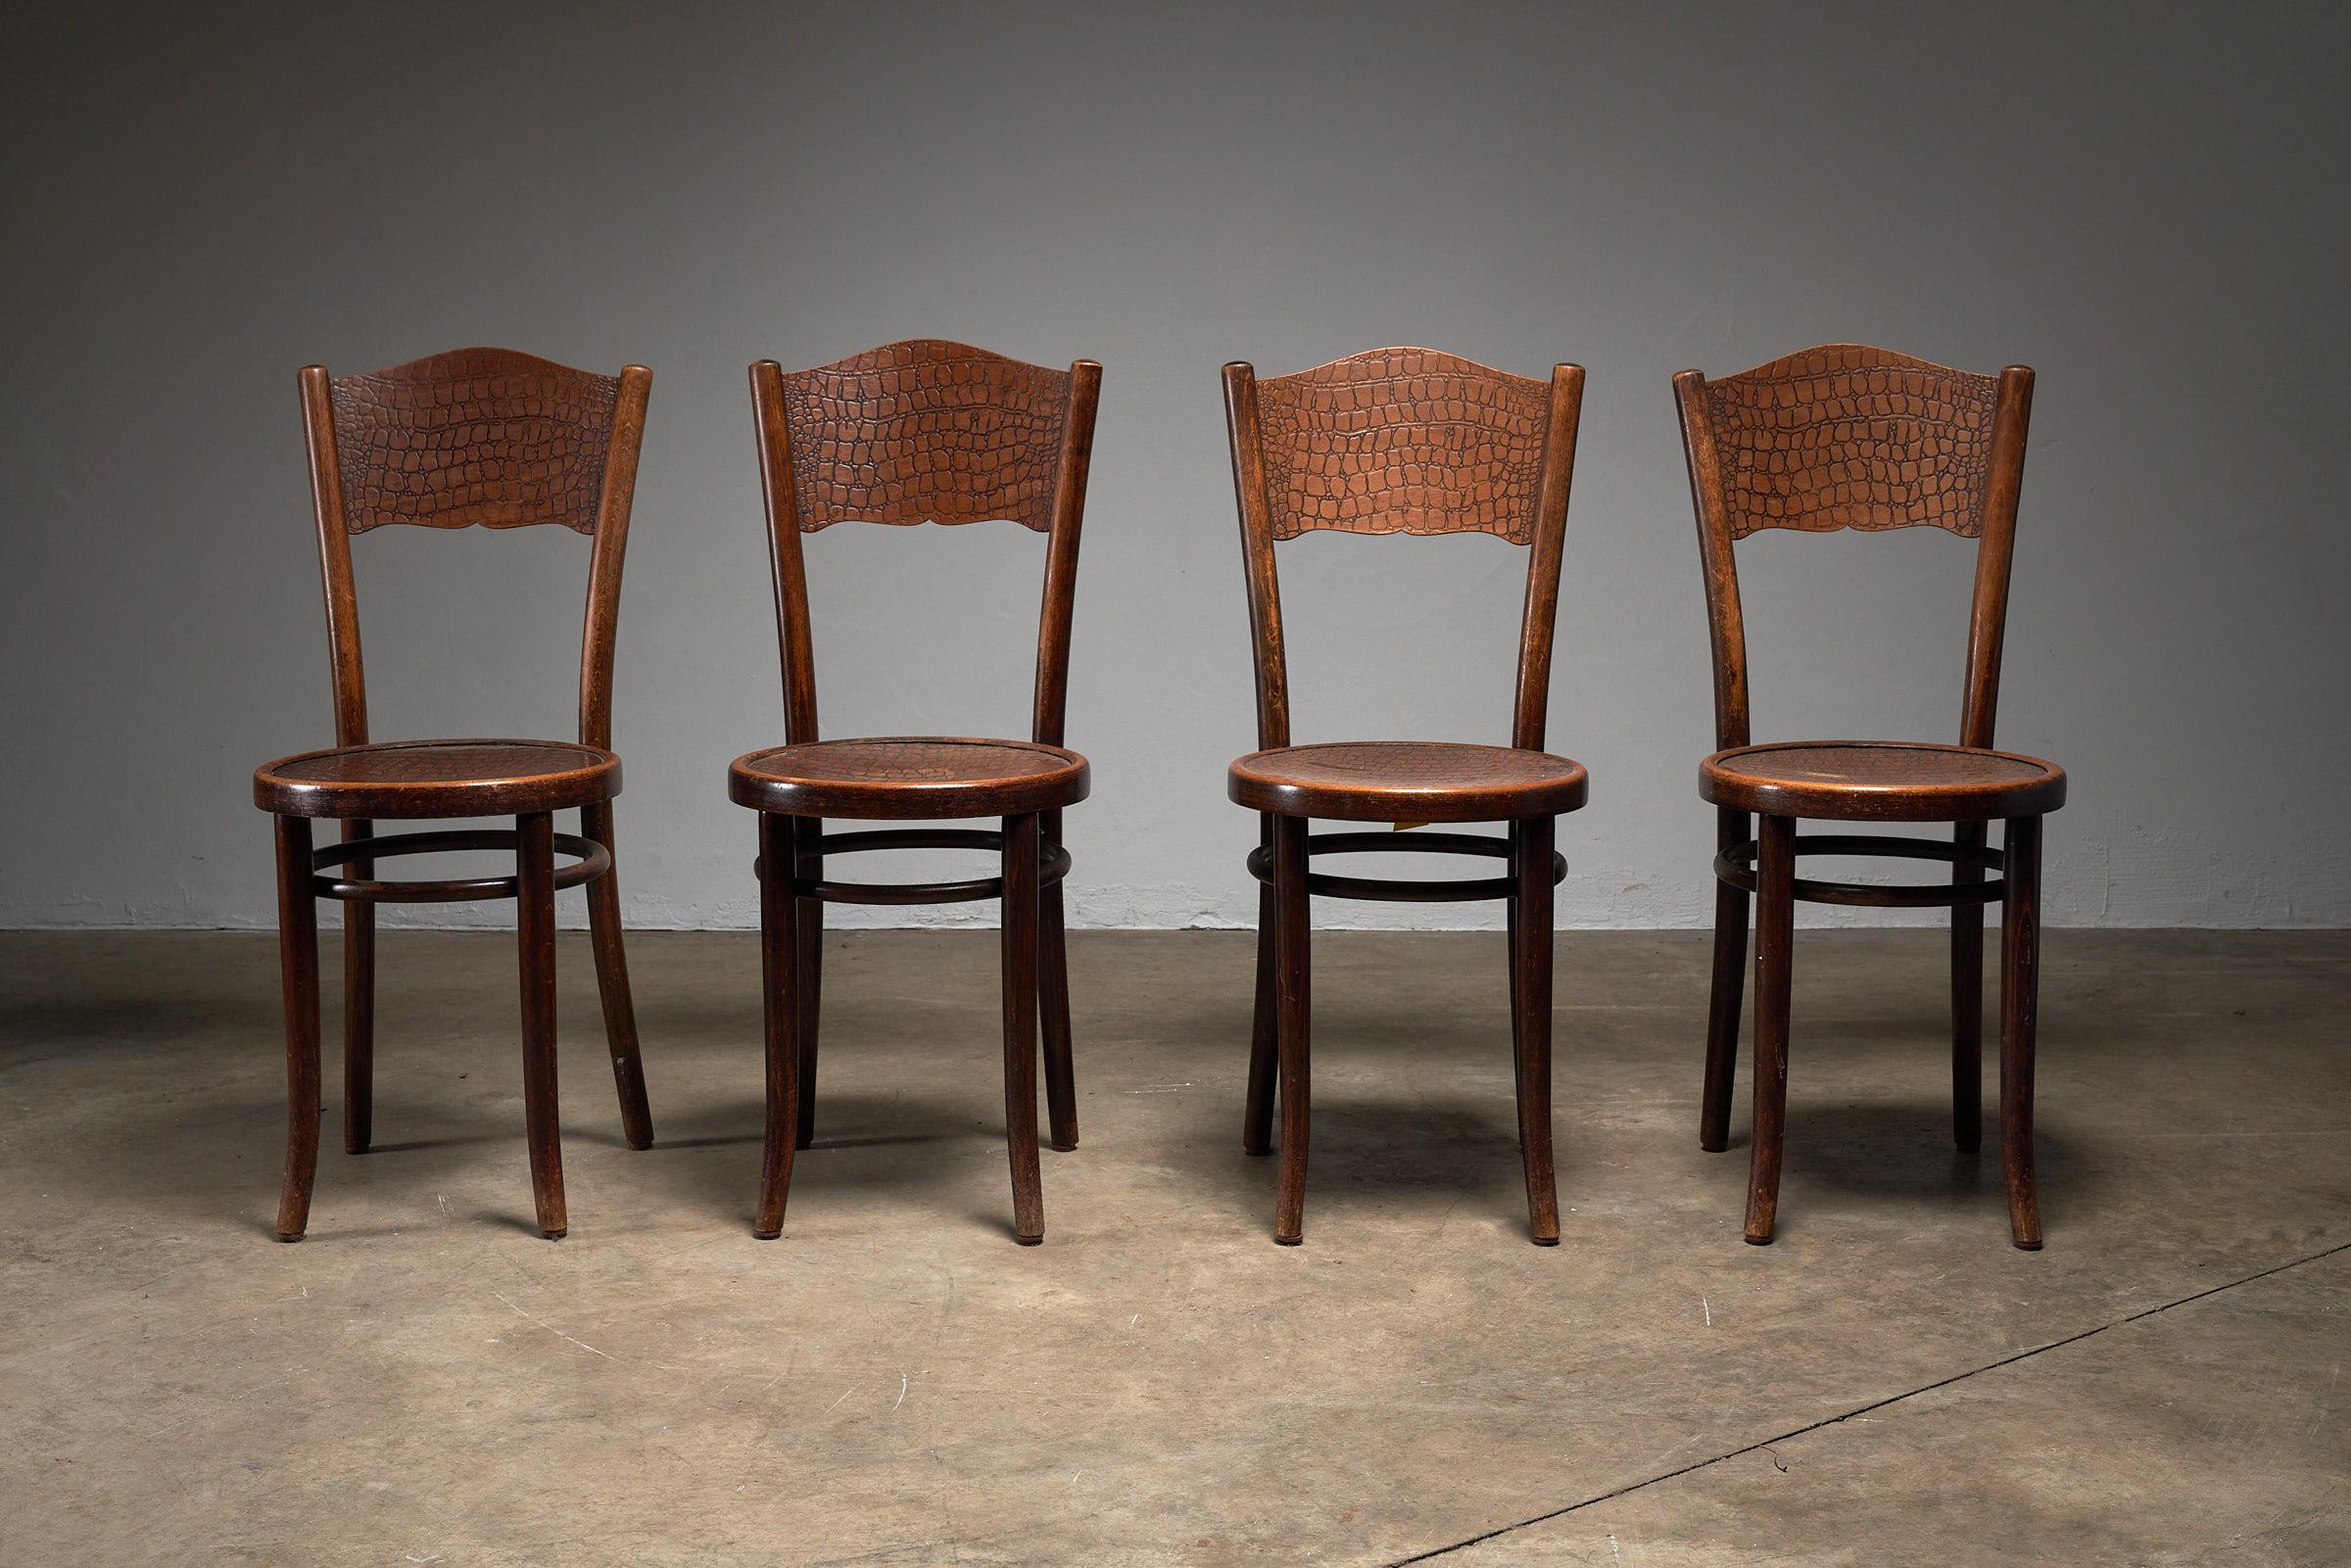 Set of 4 vintage bentwood bistro chairs with Crocodile pattern by Thonet.